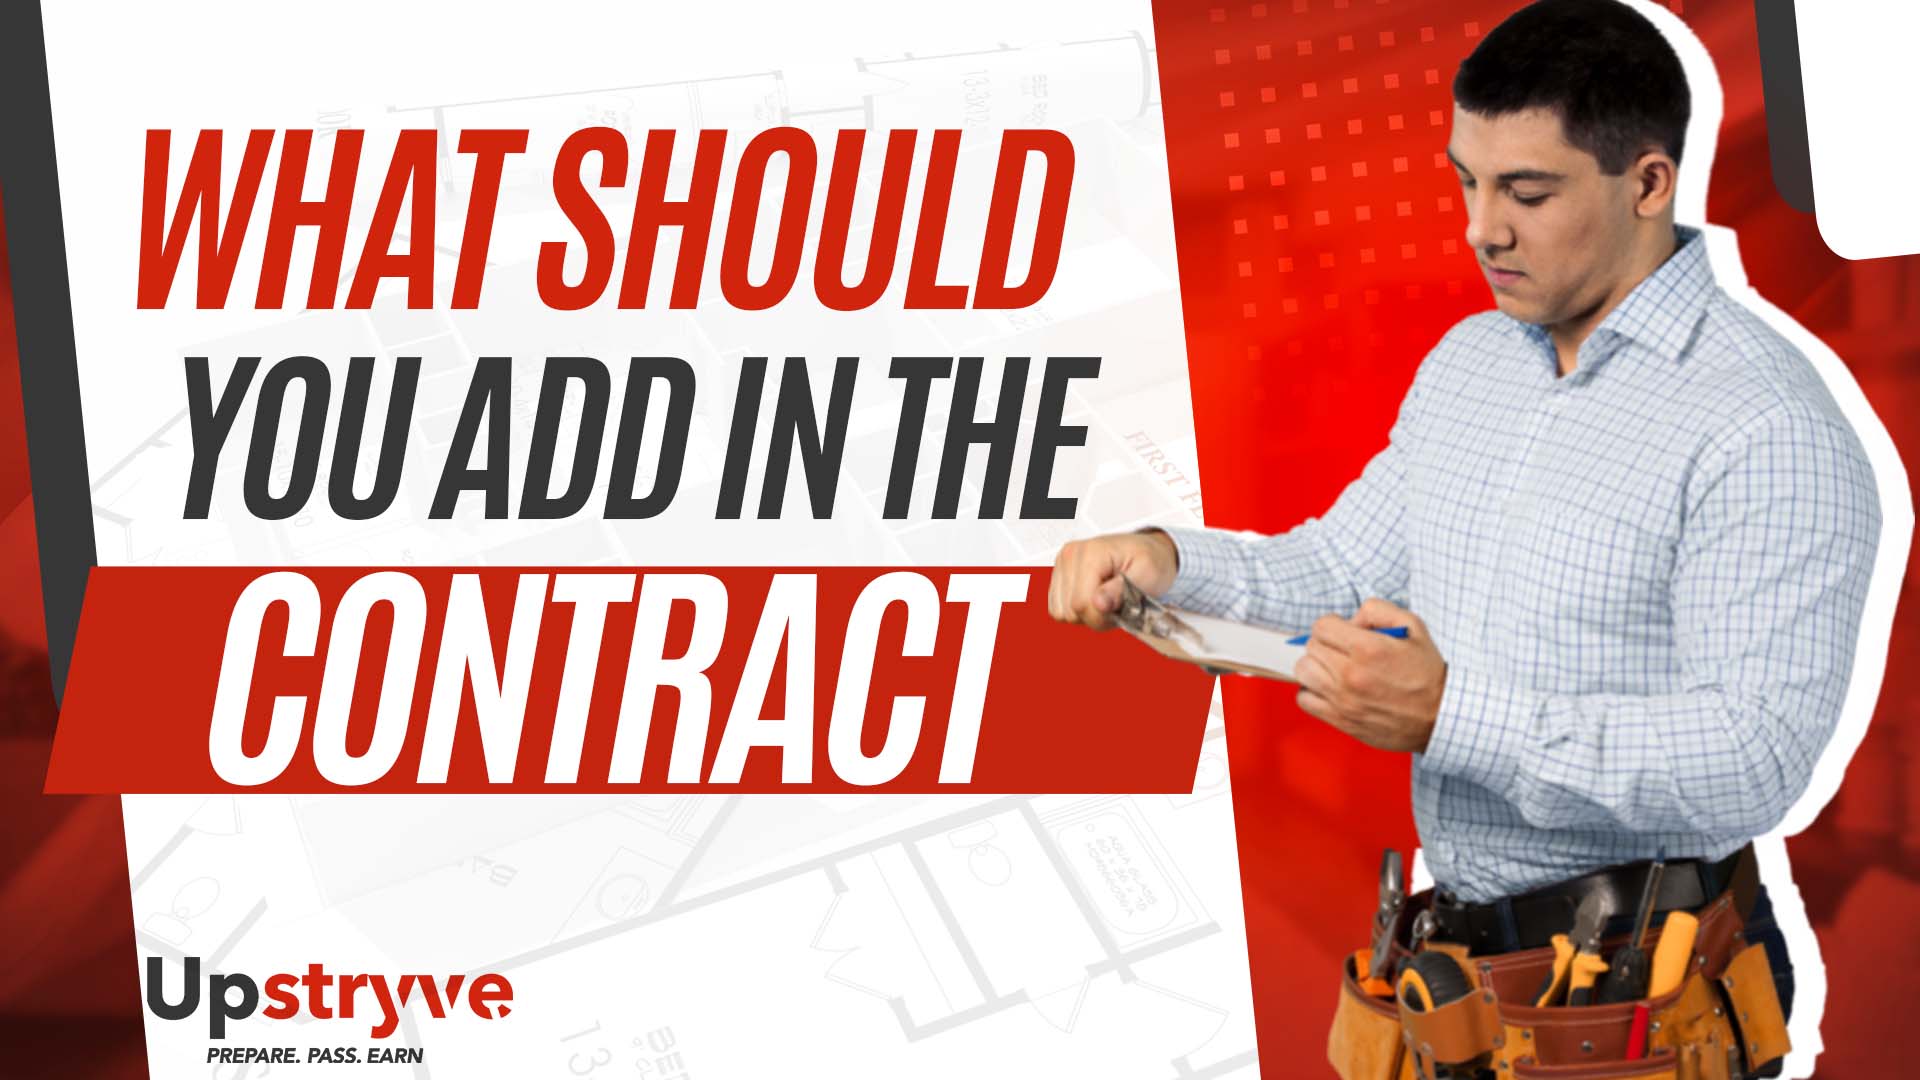 What To Add In Your Contracts As A General Contractor
Eduardo "EZHome" Lopez goes over some of the mistakes he made early in his career and how he adjusted. Eddy talks about what you should add to your contracts before starting work with any new client as a general contractor. He also discusses what you should do if you ever make a mistake on a bid. These tips can help you make or save thousands of dollars in your business so make sure to watch and take notes.